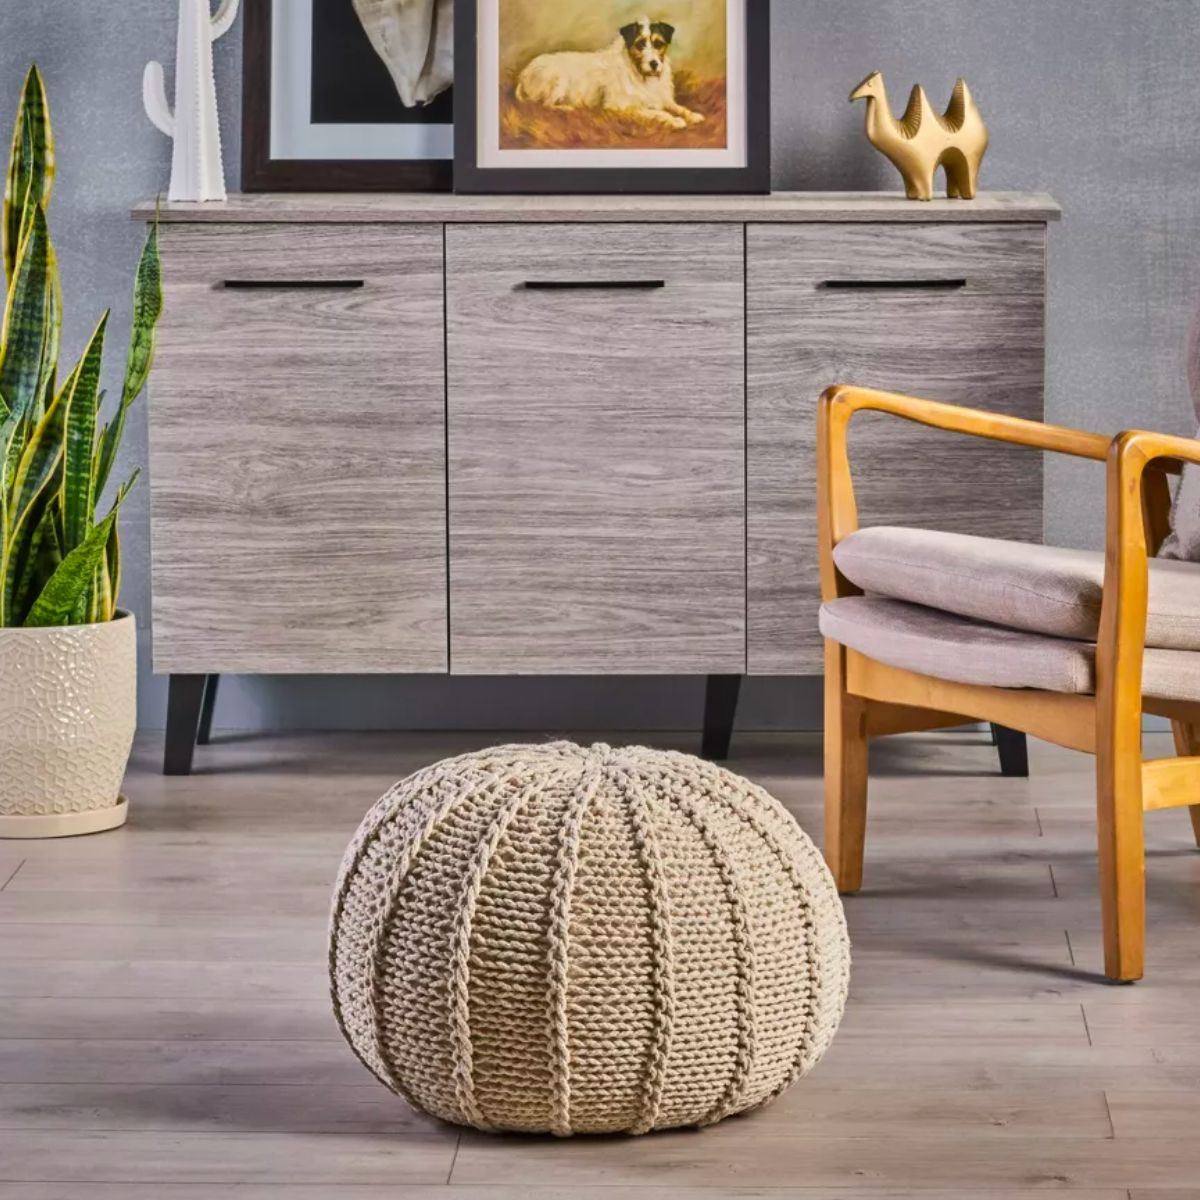 Christopher Knight Home Corisande Knitted Cotton Pouf in front of a credenza and wood frame chair